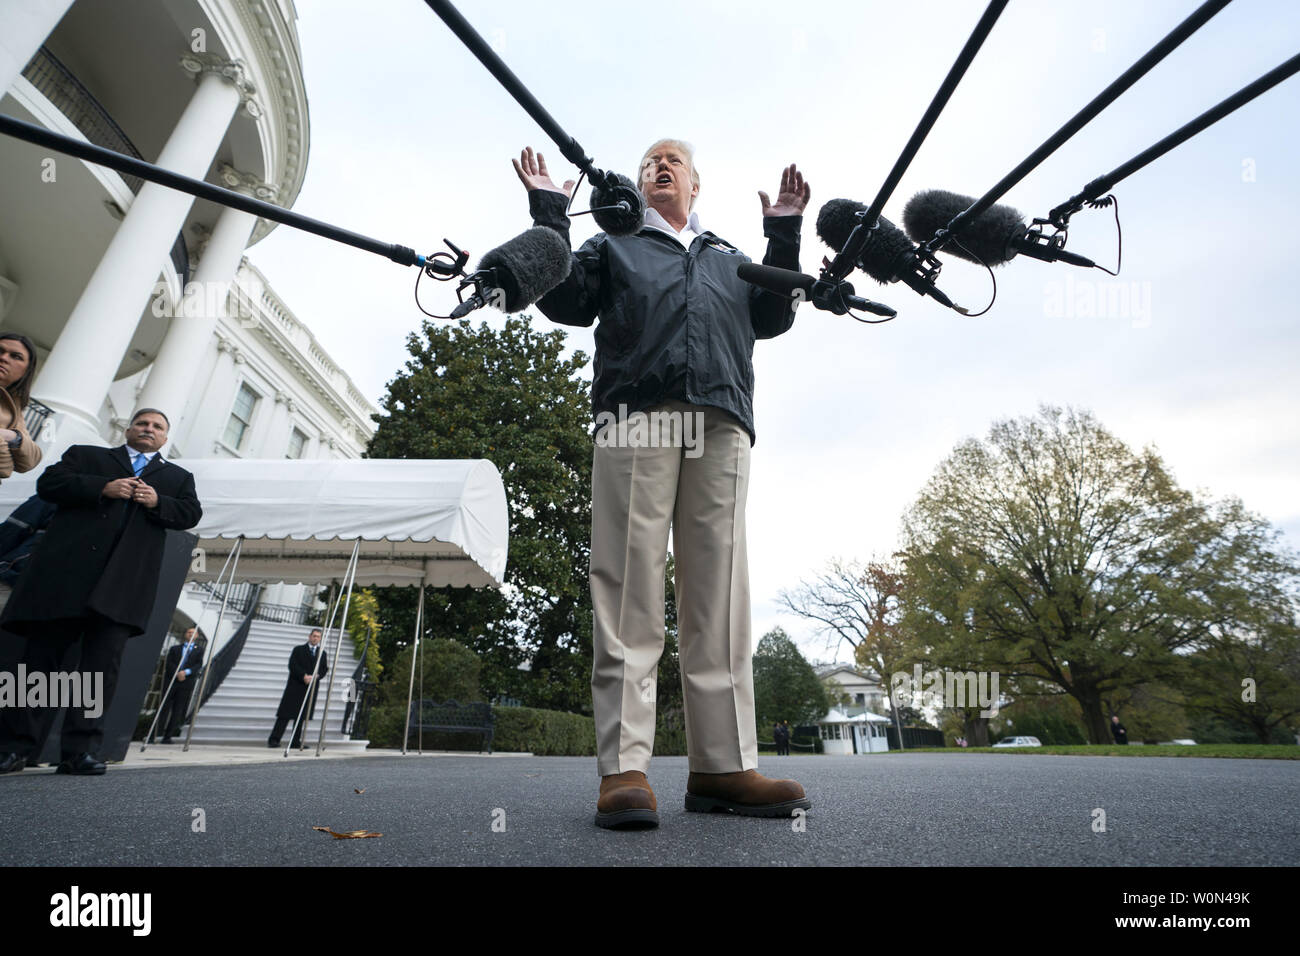 U.S. President Donald Trump speaks to the media before he departs the White House for California, where he is scheduled to view damage from that state's wildfires, in Washington, DC, on November 17, 2018. Seventy-four people have been killed and more than 1,000 people are missing due to multiple devastating fires across the state. The President spoke about the investigation into Jamal Khashoggi's murder, the Mueller investigation, and the migrant caravan approaching the southern border.   Photo by Jim Lo Scalzo/UPI Stock Photo